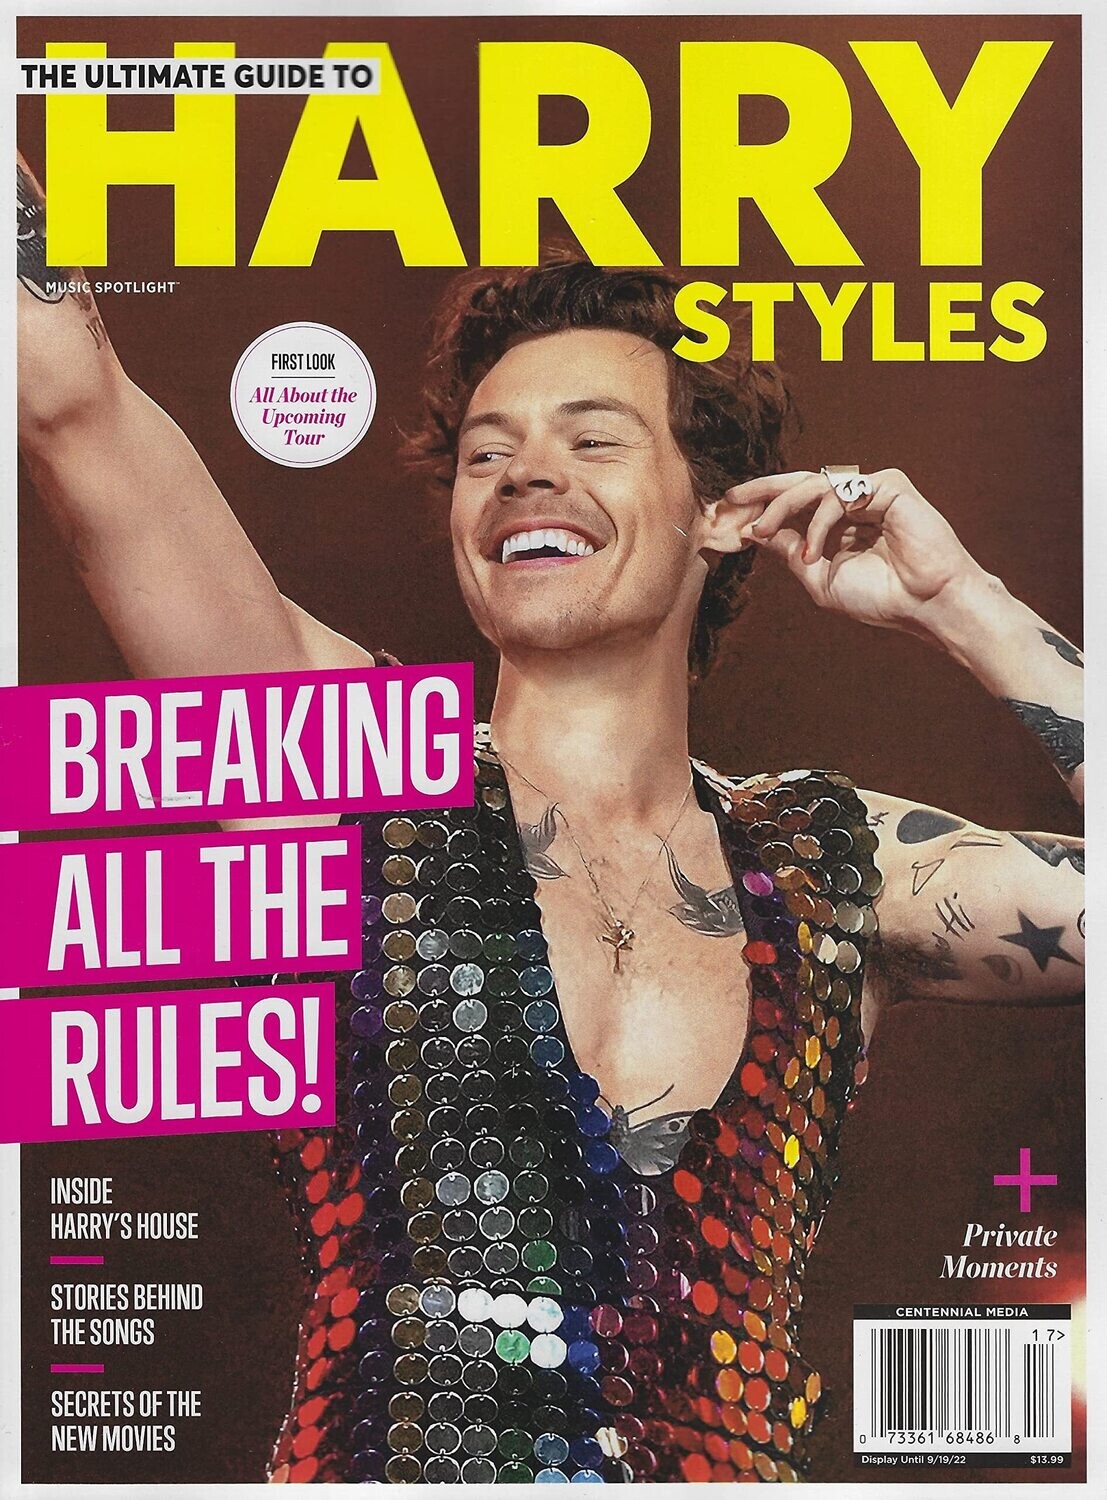 The Ultimate Guide to Harry Styles-Breaking All The Rules